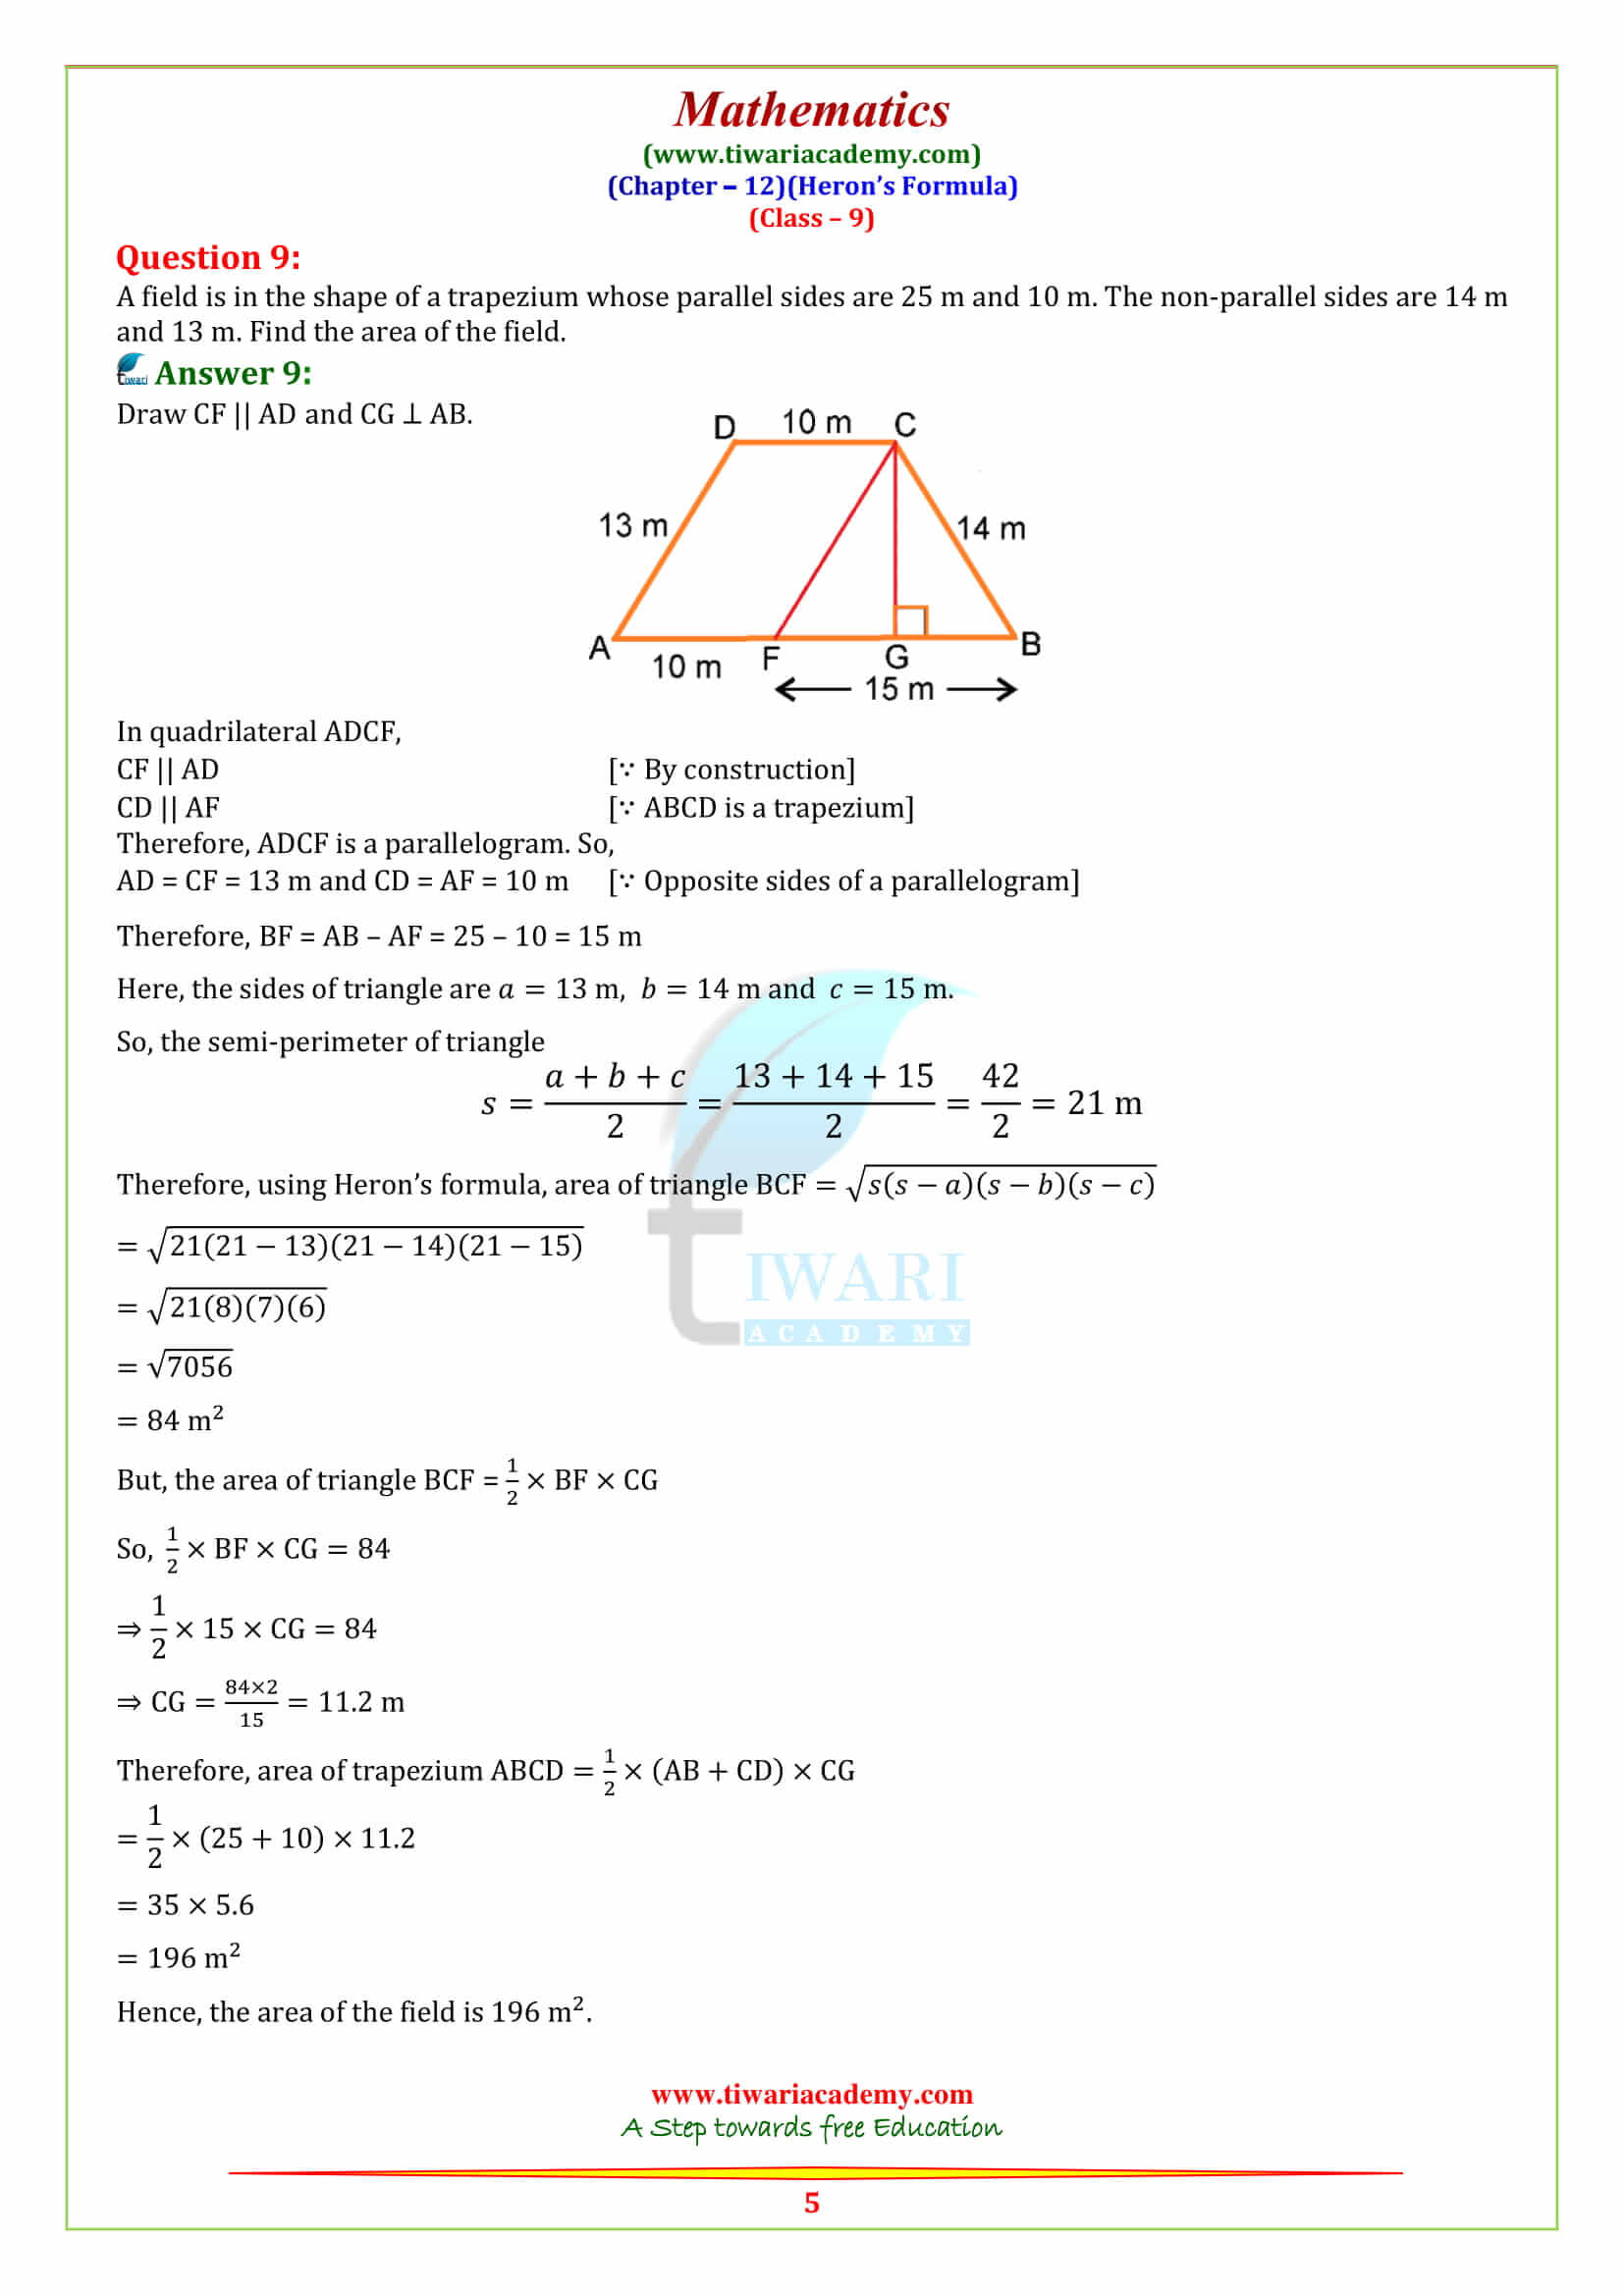 NCERT Solutions for Class 9 Maths Chapter 12 Heron's Formula Exercise 12.2 for mp board pdf